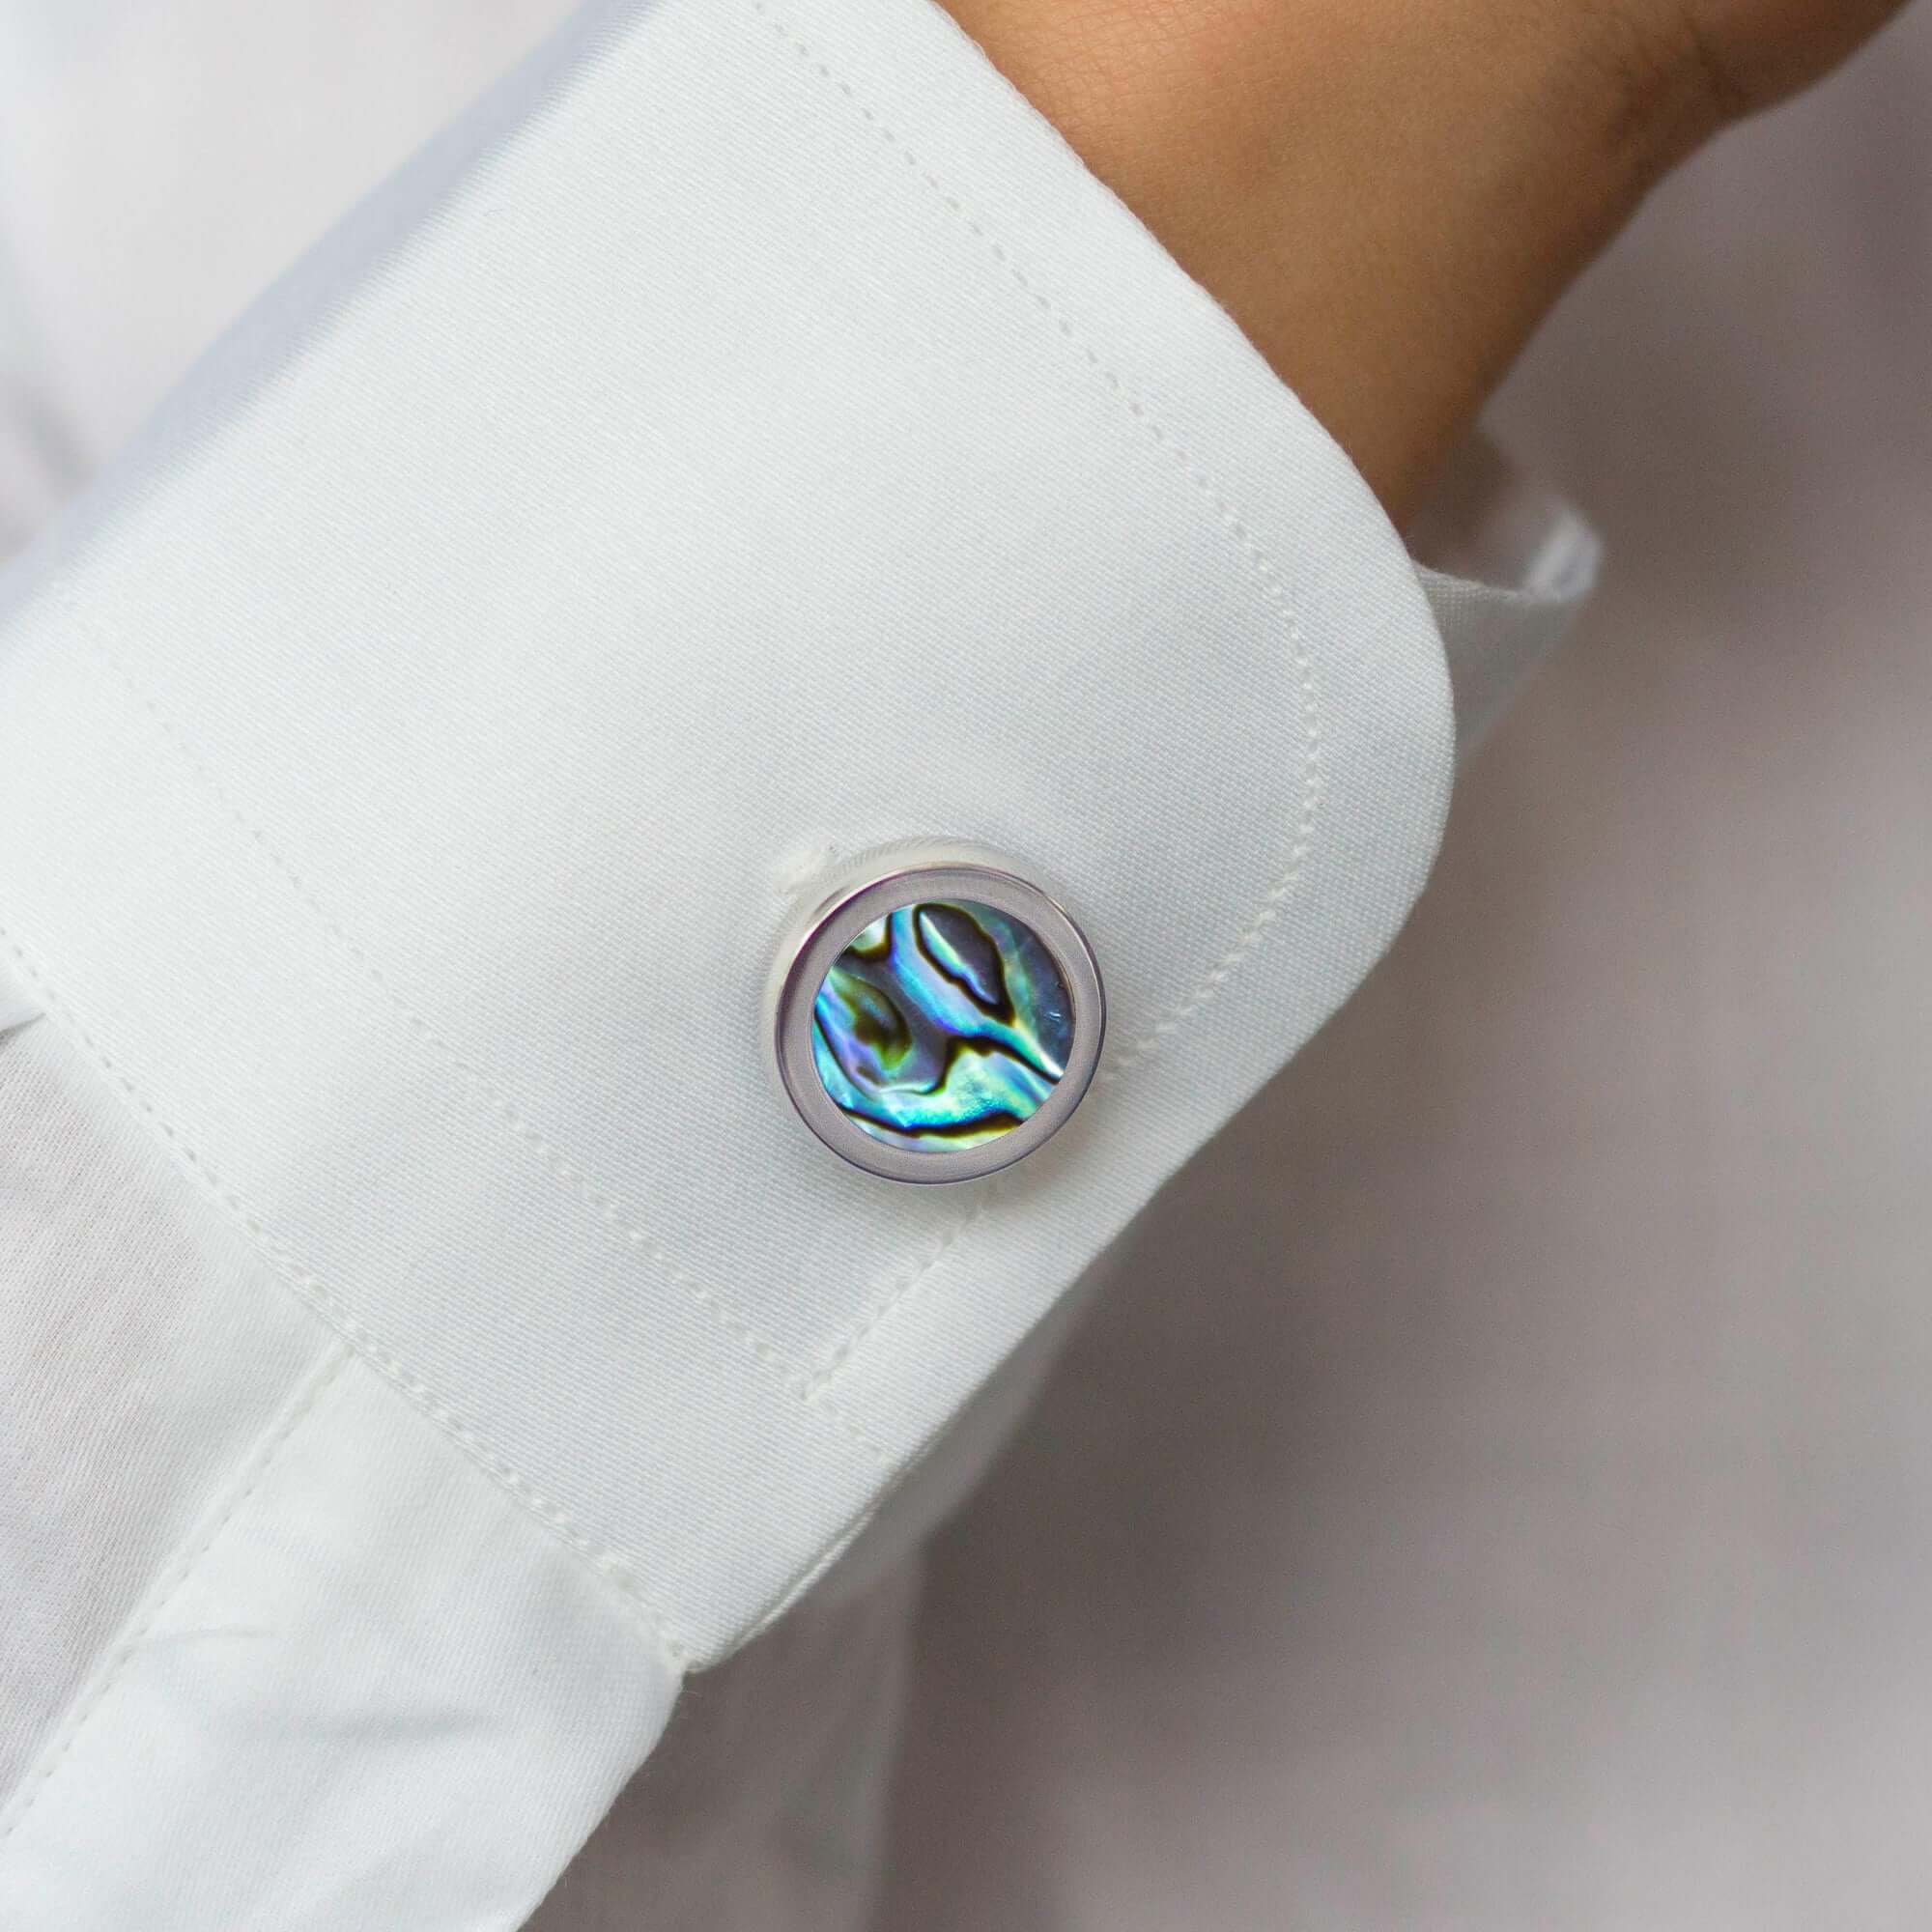 Abalone Shell Pearl Button Covers-Button Covers-A.Azthom-Cufflinks.com.sg